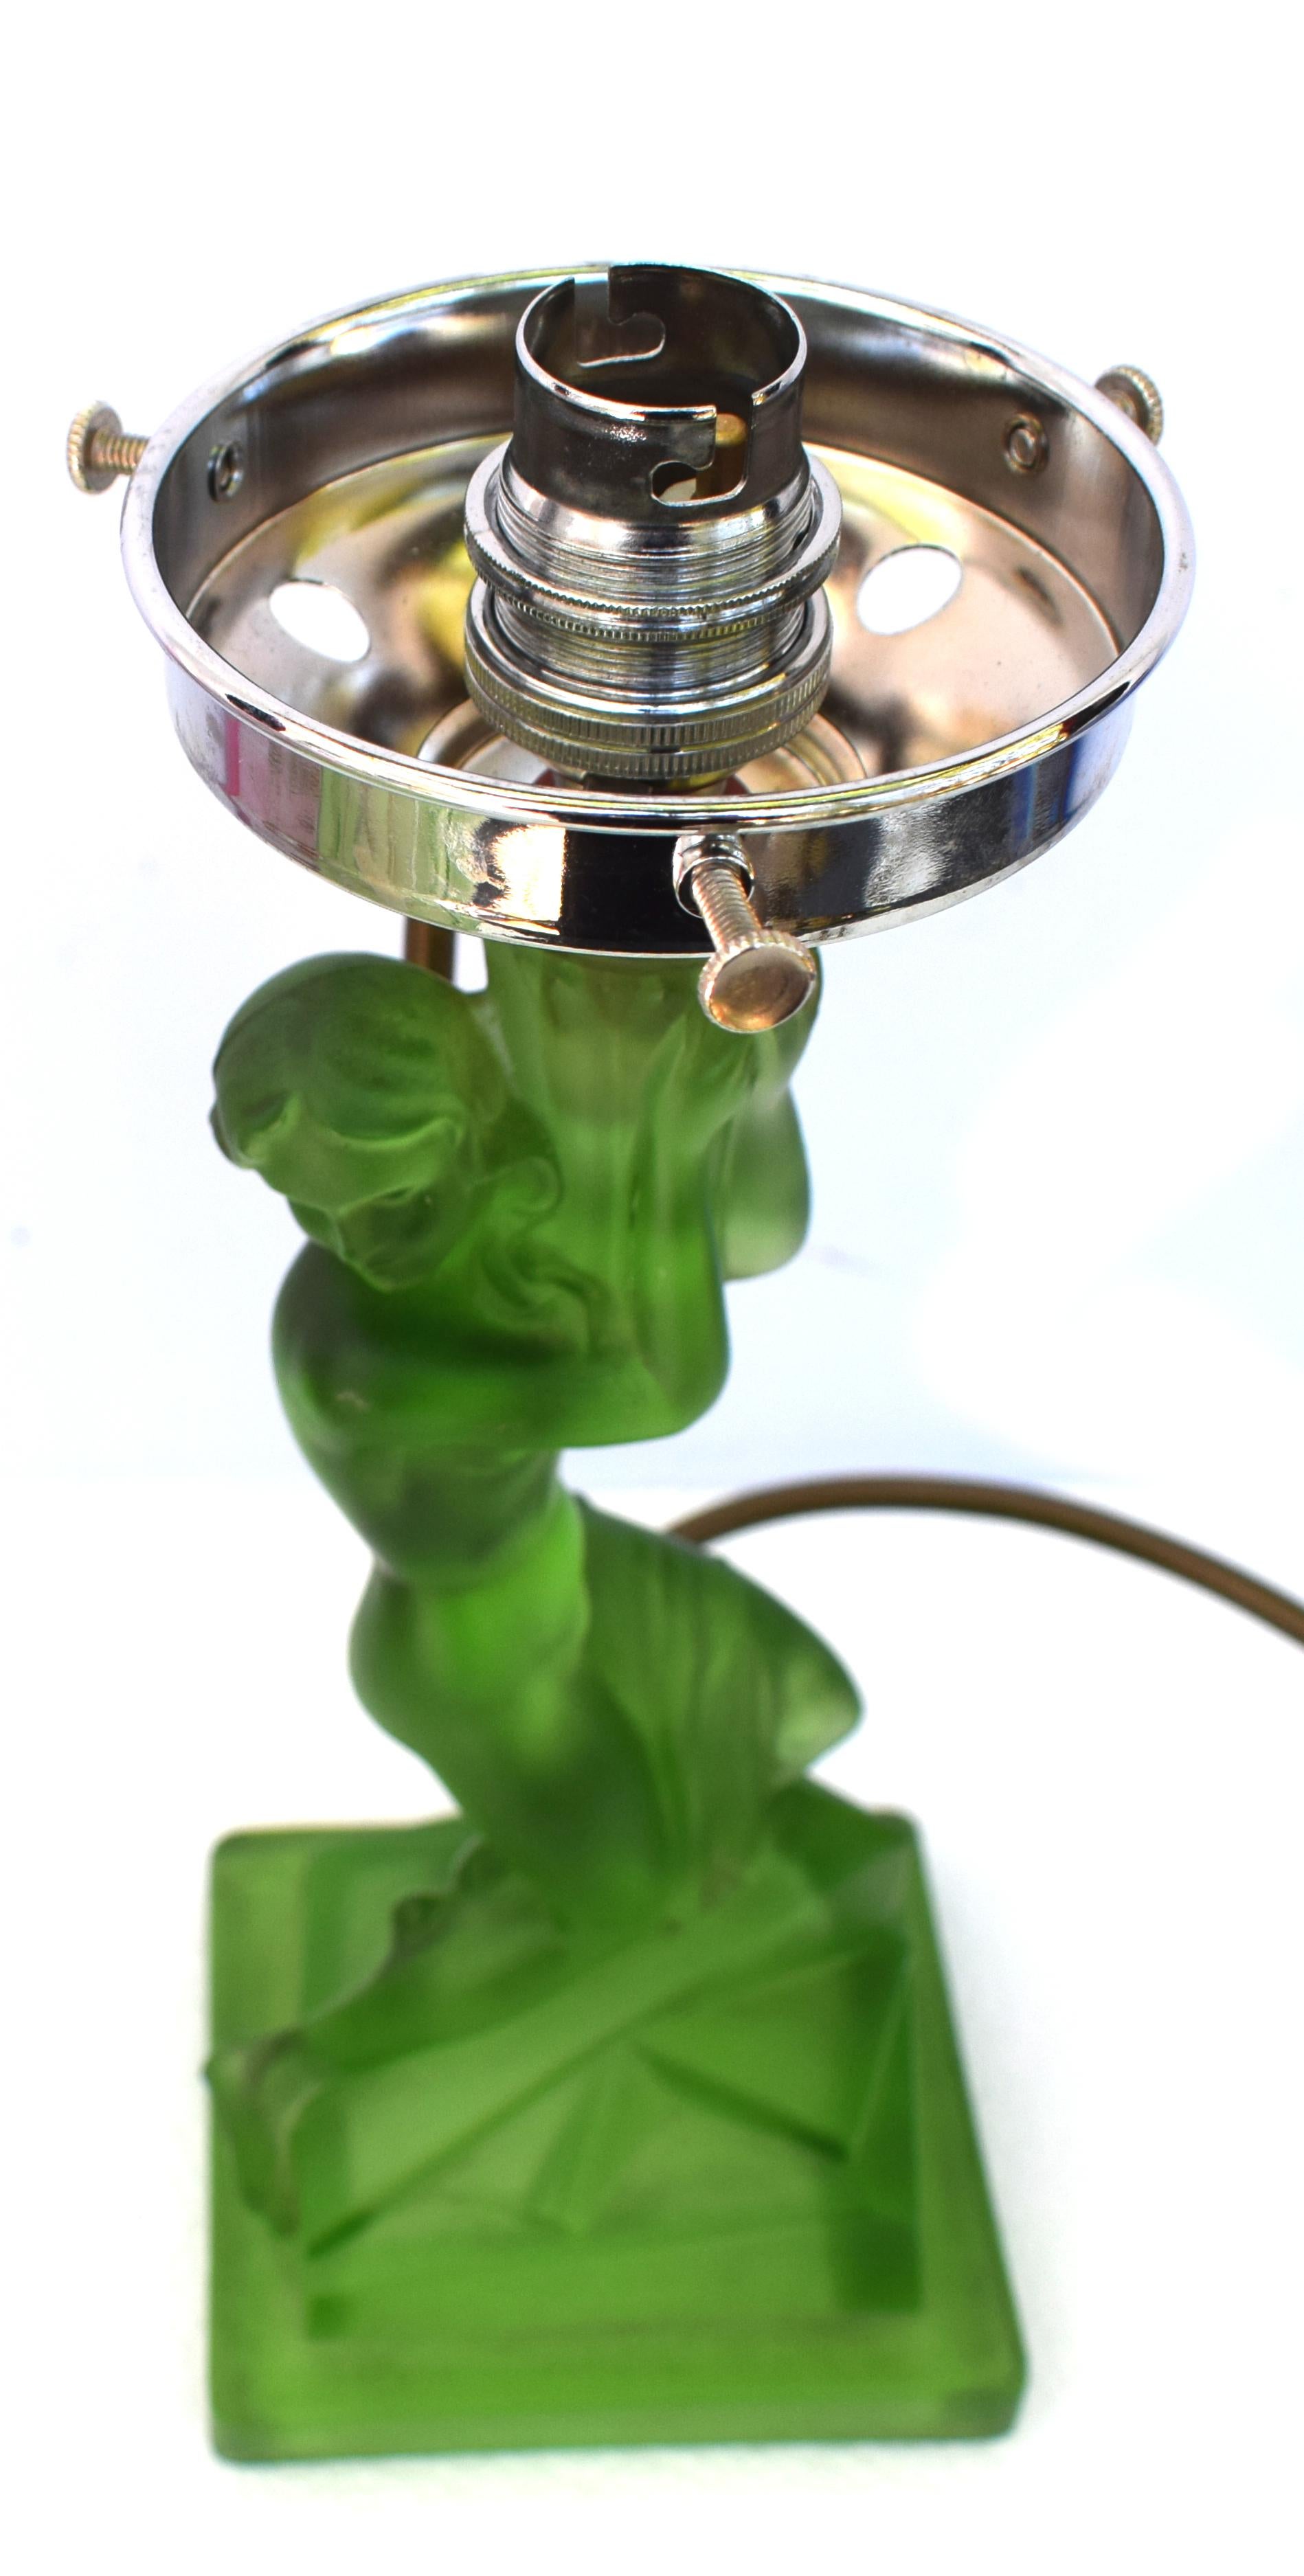 For your consideration is this tall and very elegant and original Walther and Sohne amber glass table lamp, circa 1930s. Features female nude to create the column of the lamp with a segmented glass shade. The green colored glass in excellent